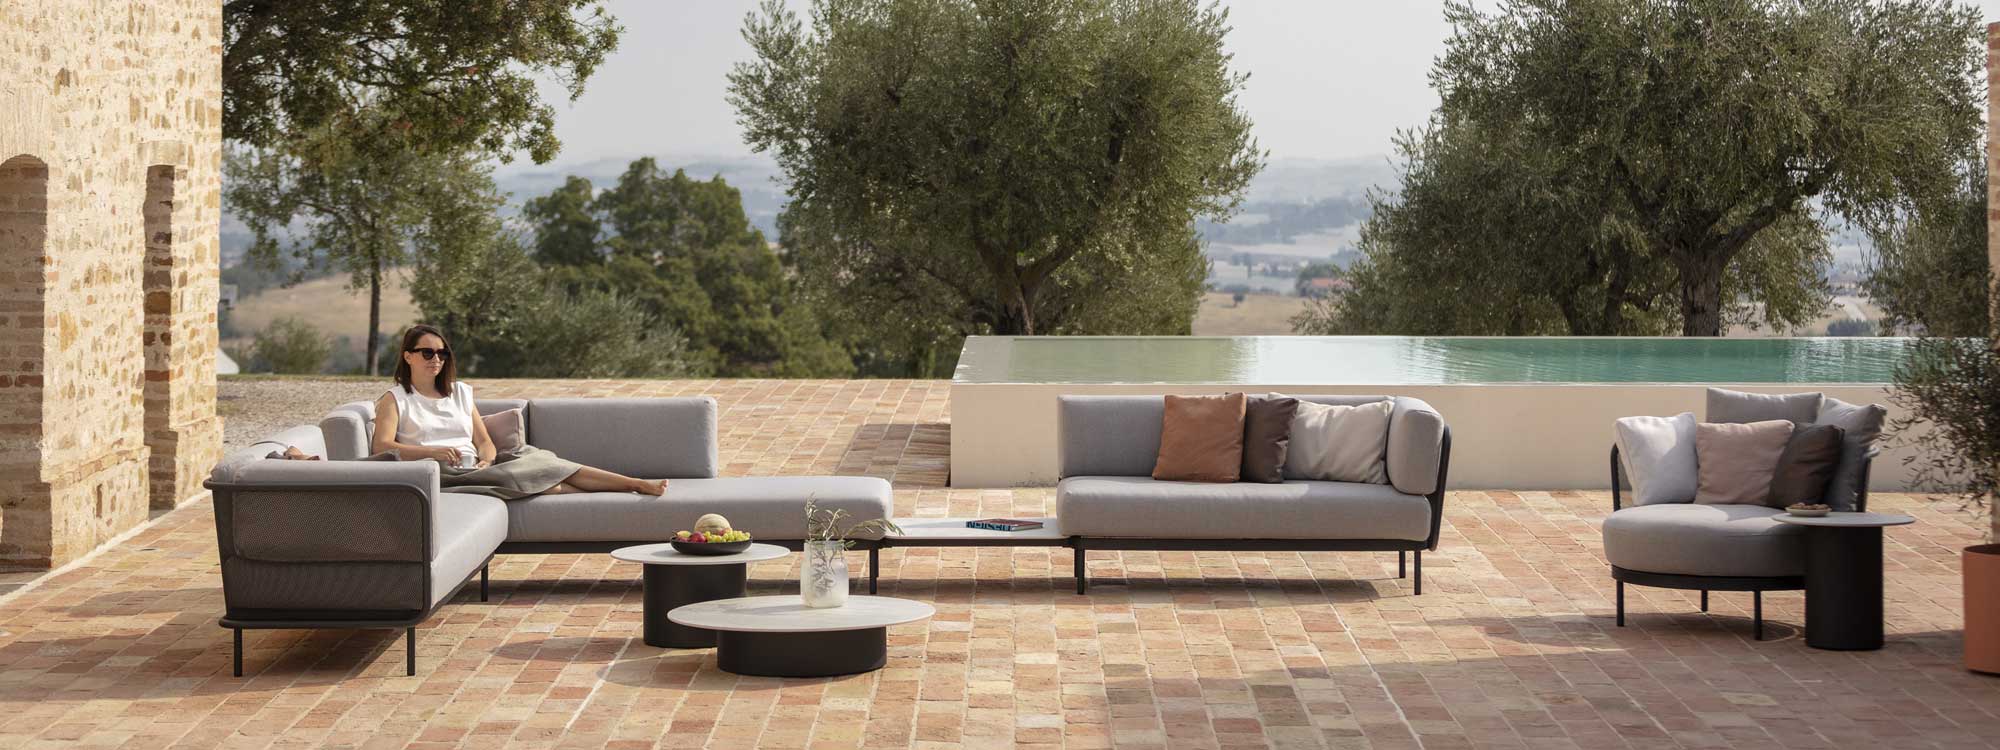 Baza modern garden sofa set with Branta low tables on sunny terrace with swimming pool and olive trees in background